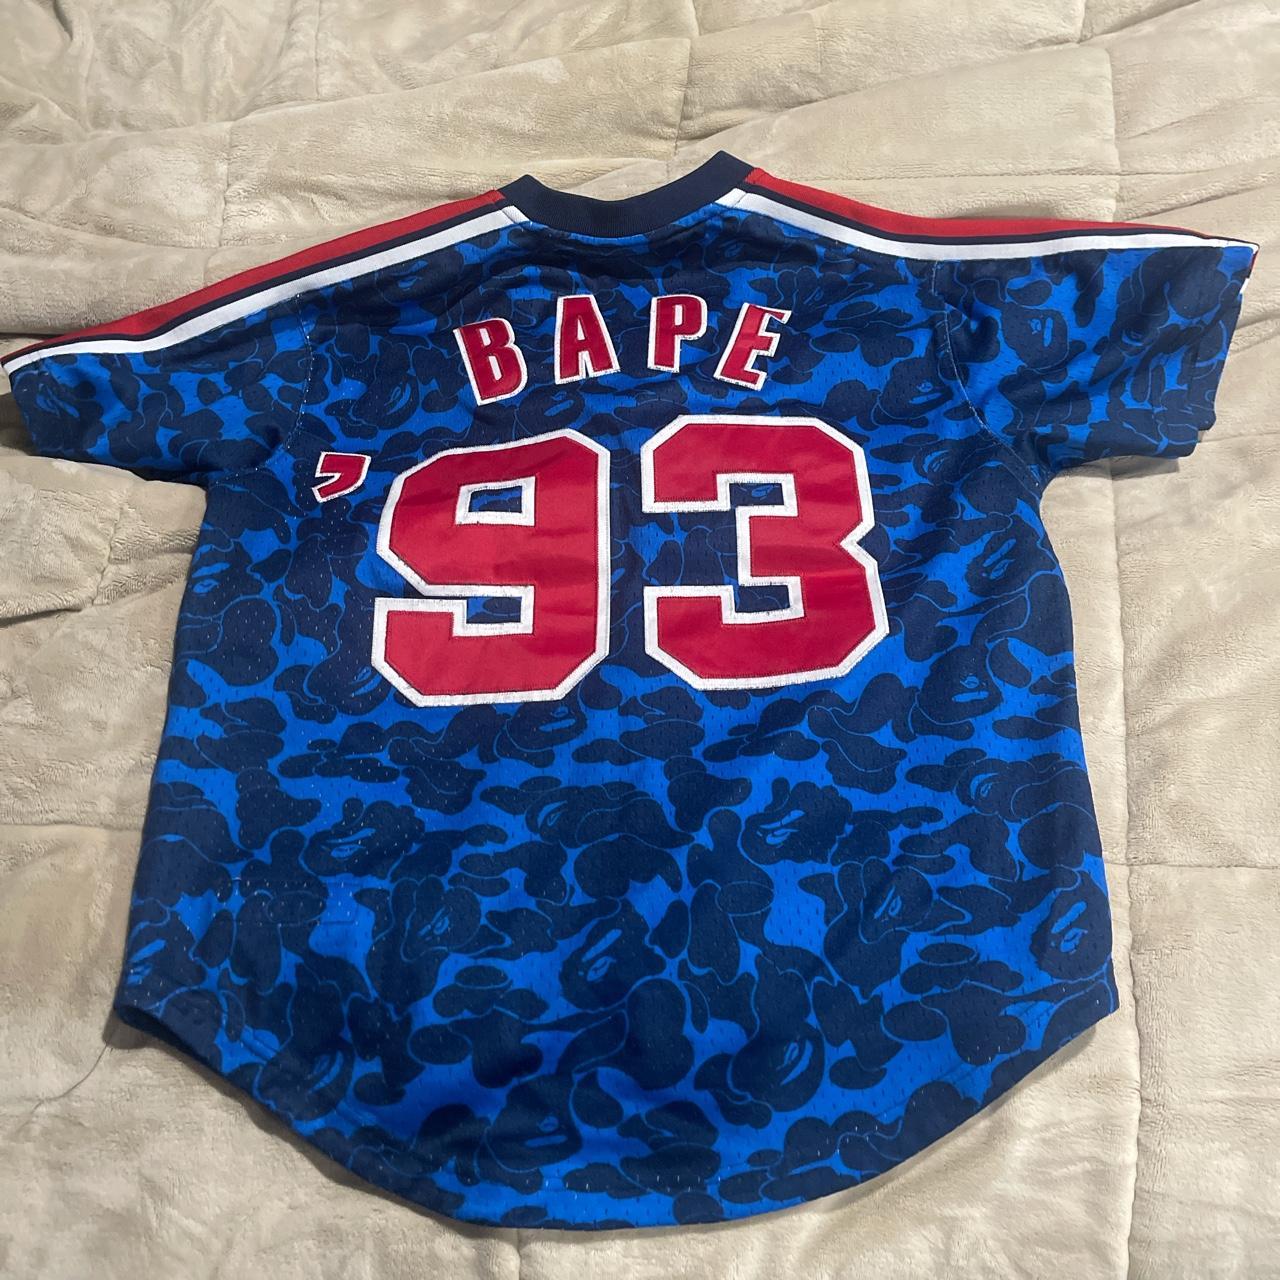 Bape 93' Jersey. Small burn hole on front, otherwise - Depop